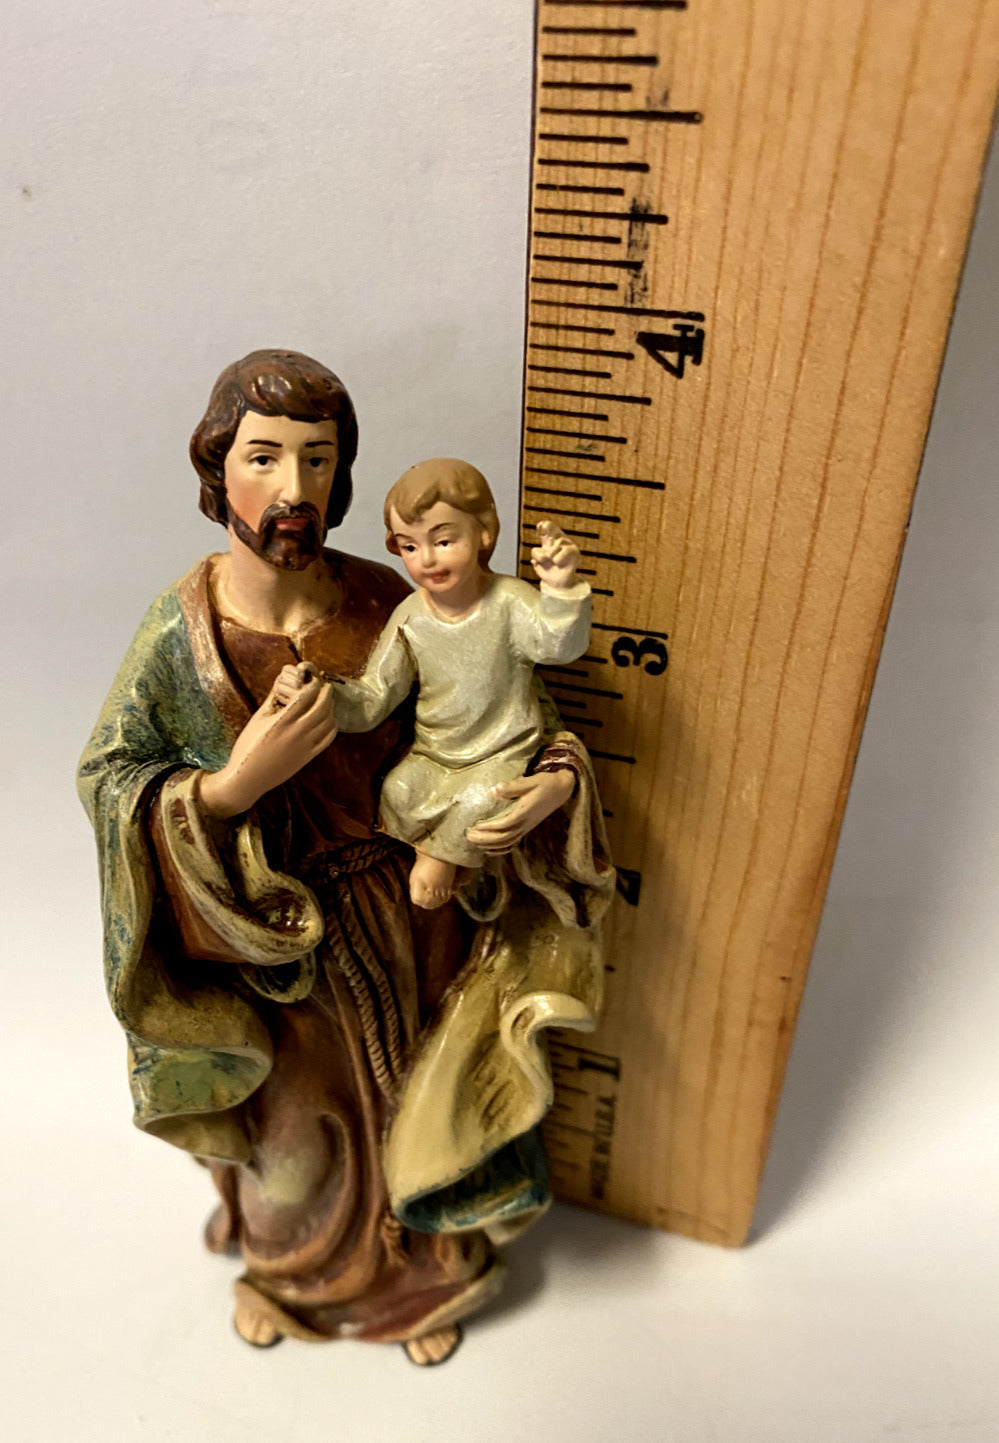 Saint Joseph with Child  4" Statue, New - Bob and Penny Lord